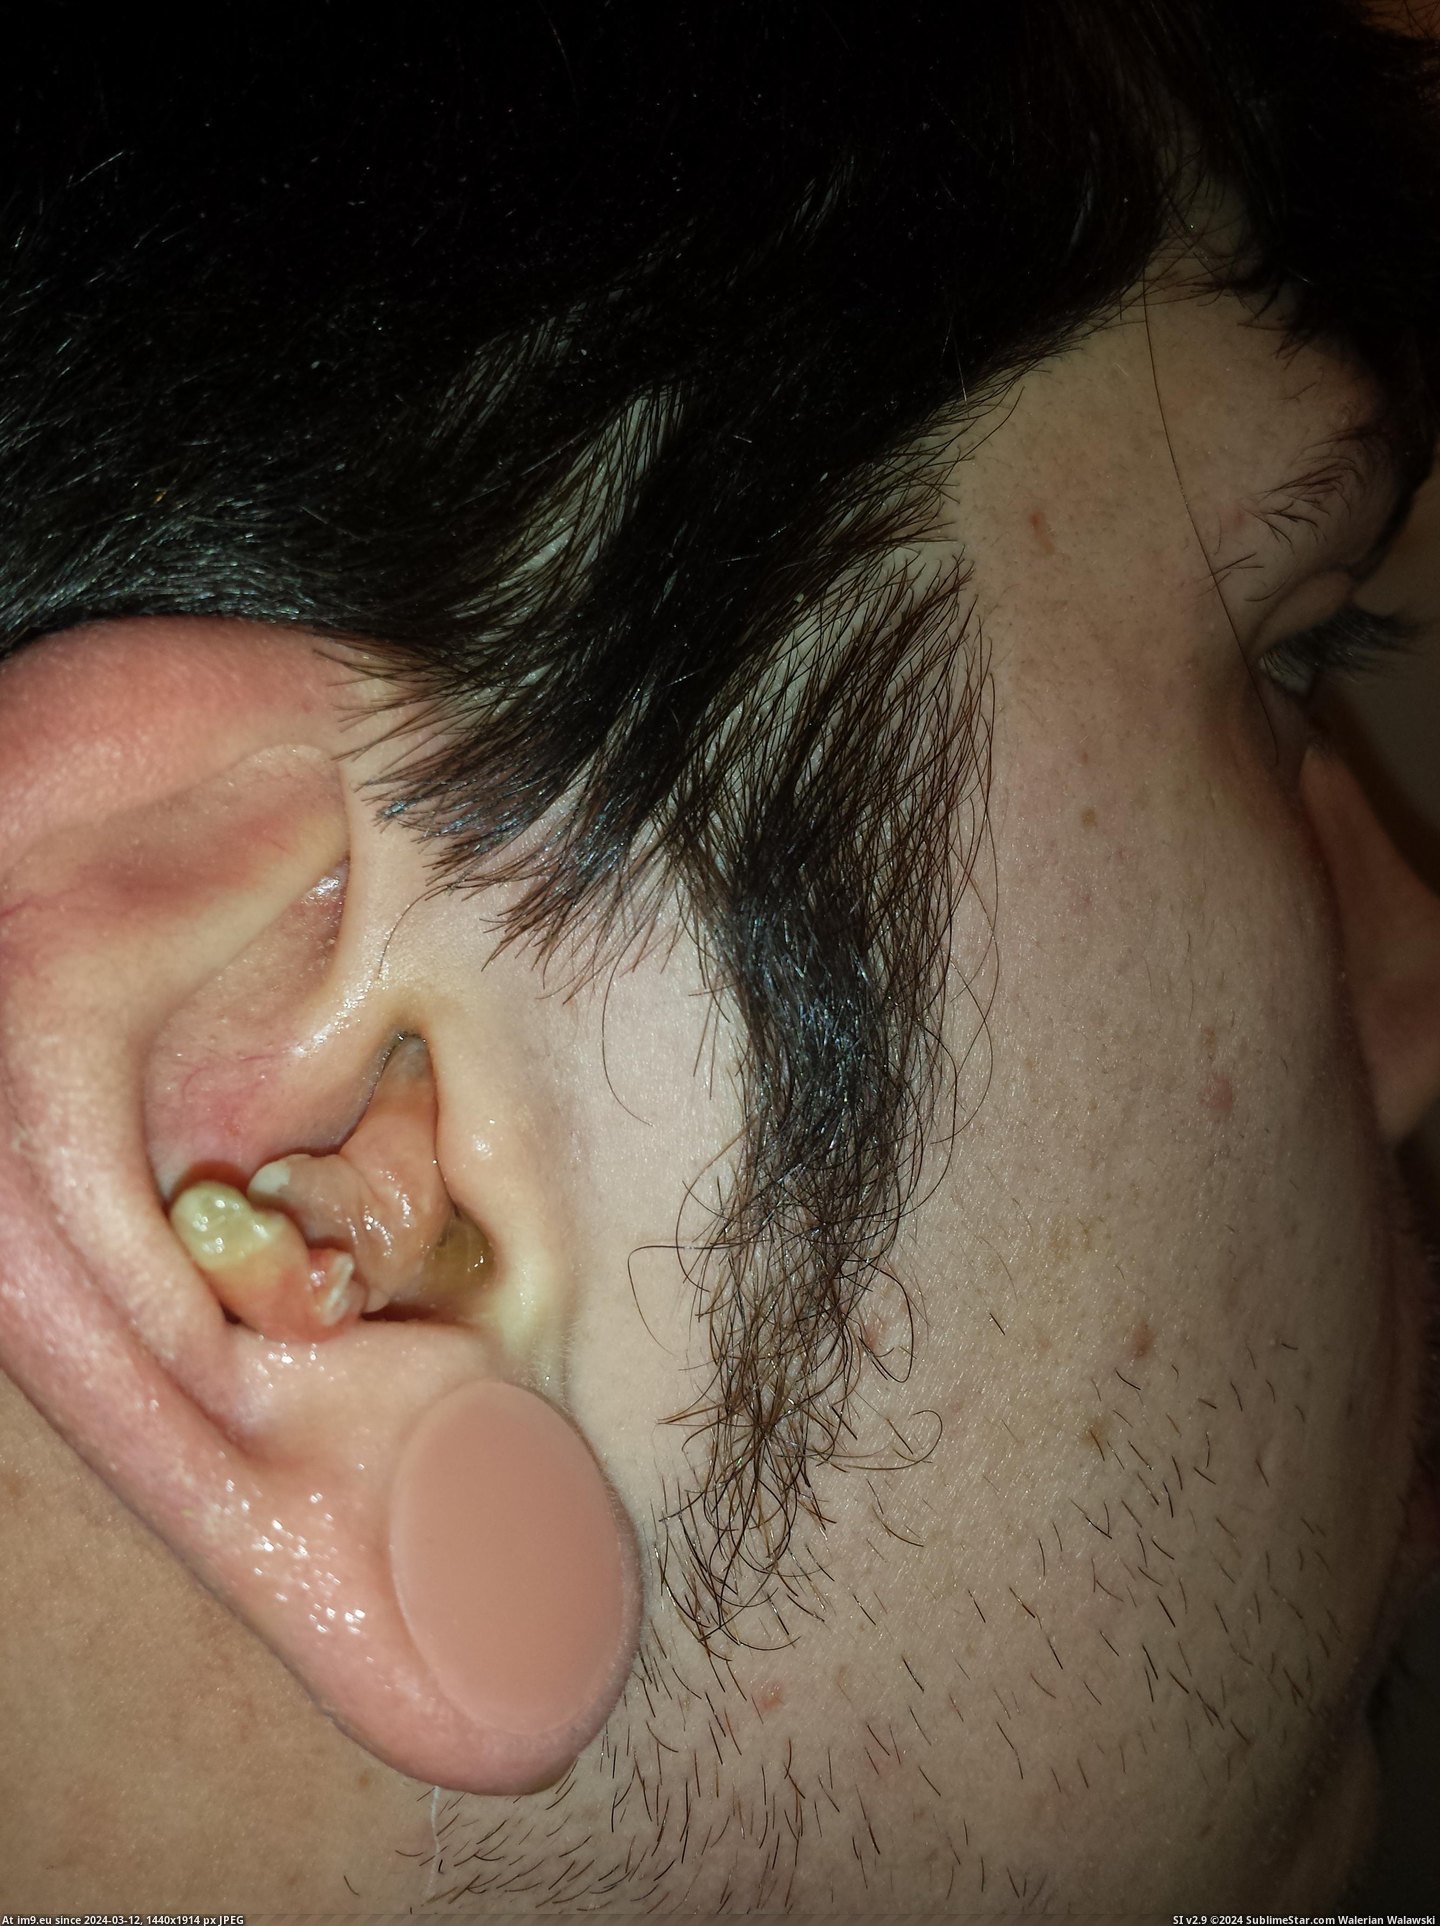 #Wtf #Ear #Infection #Crazy [Wtf] My crazy ear infection 13 Pic. (Изображение из альбом My r/WTF favs))